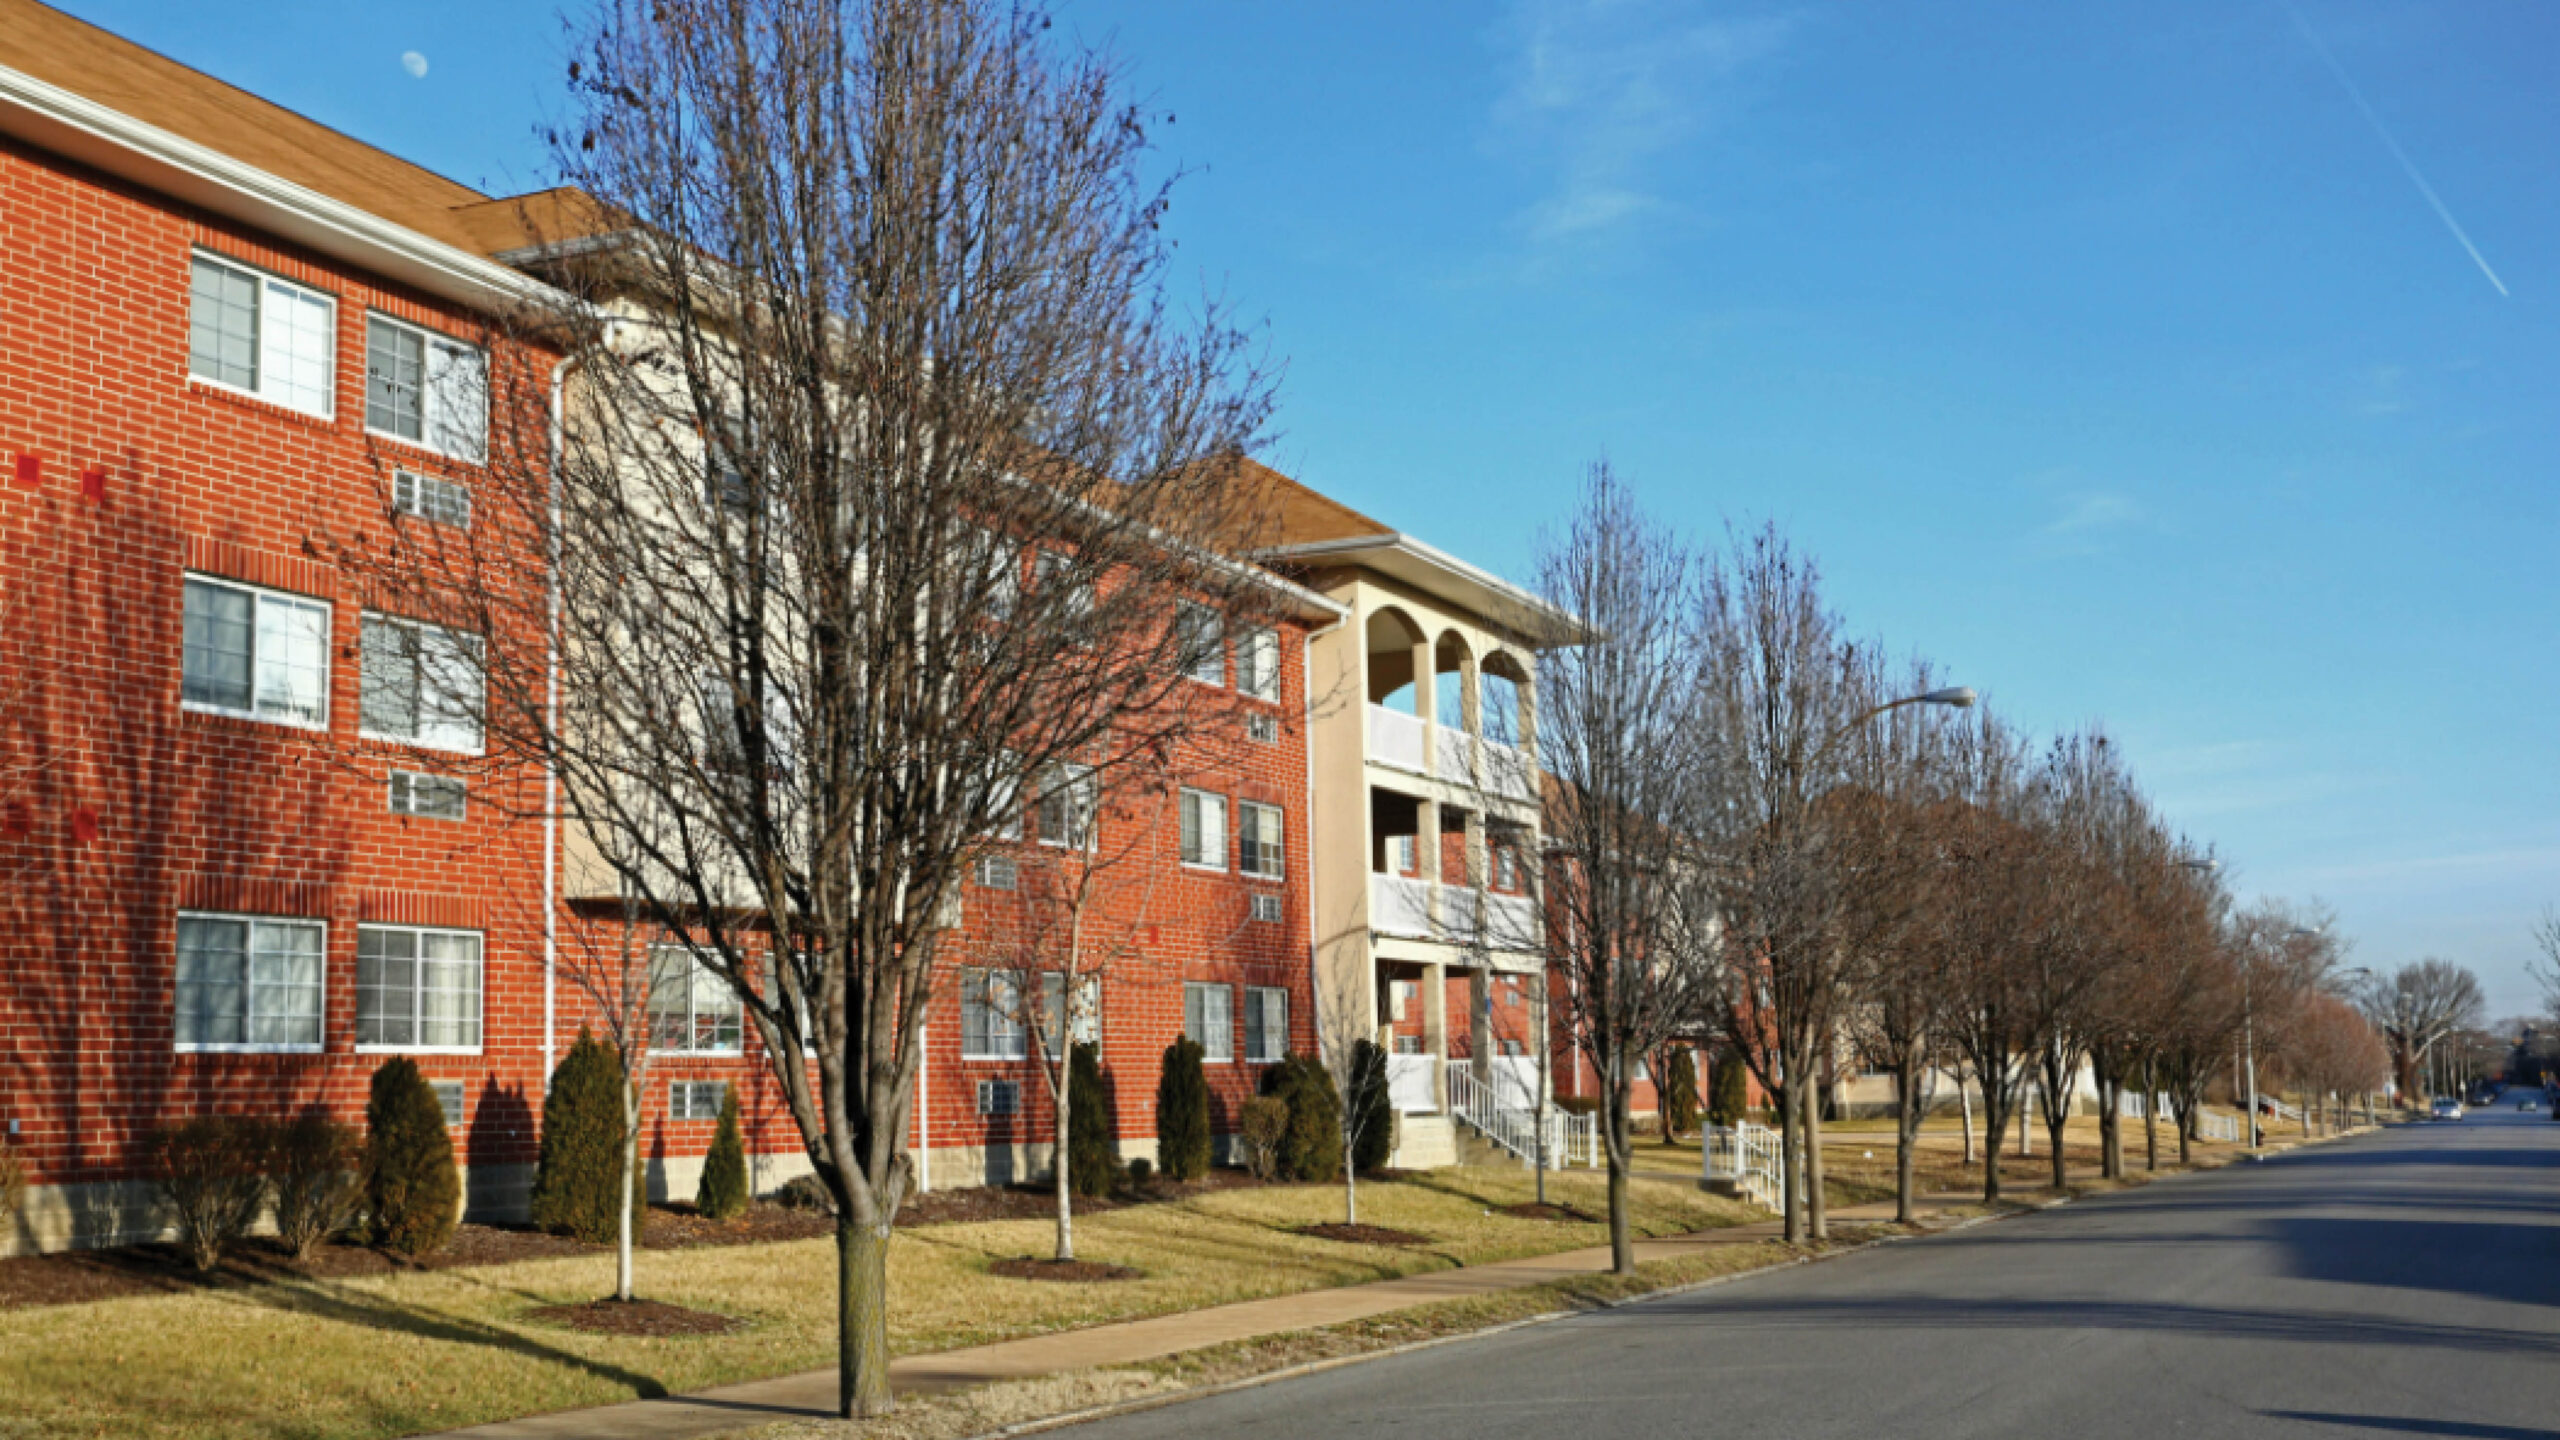 multi-story brick apartment building with balconies and trees